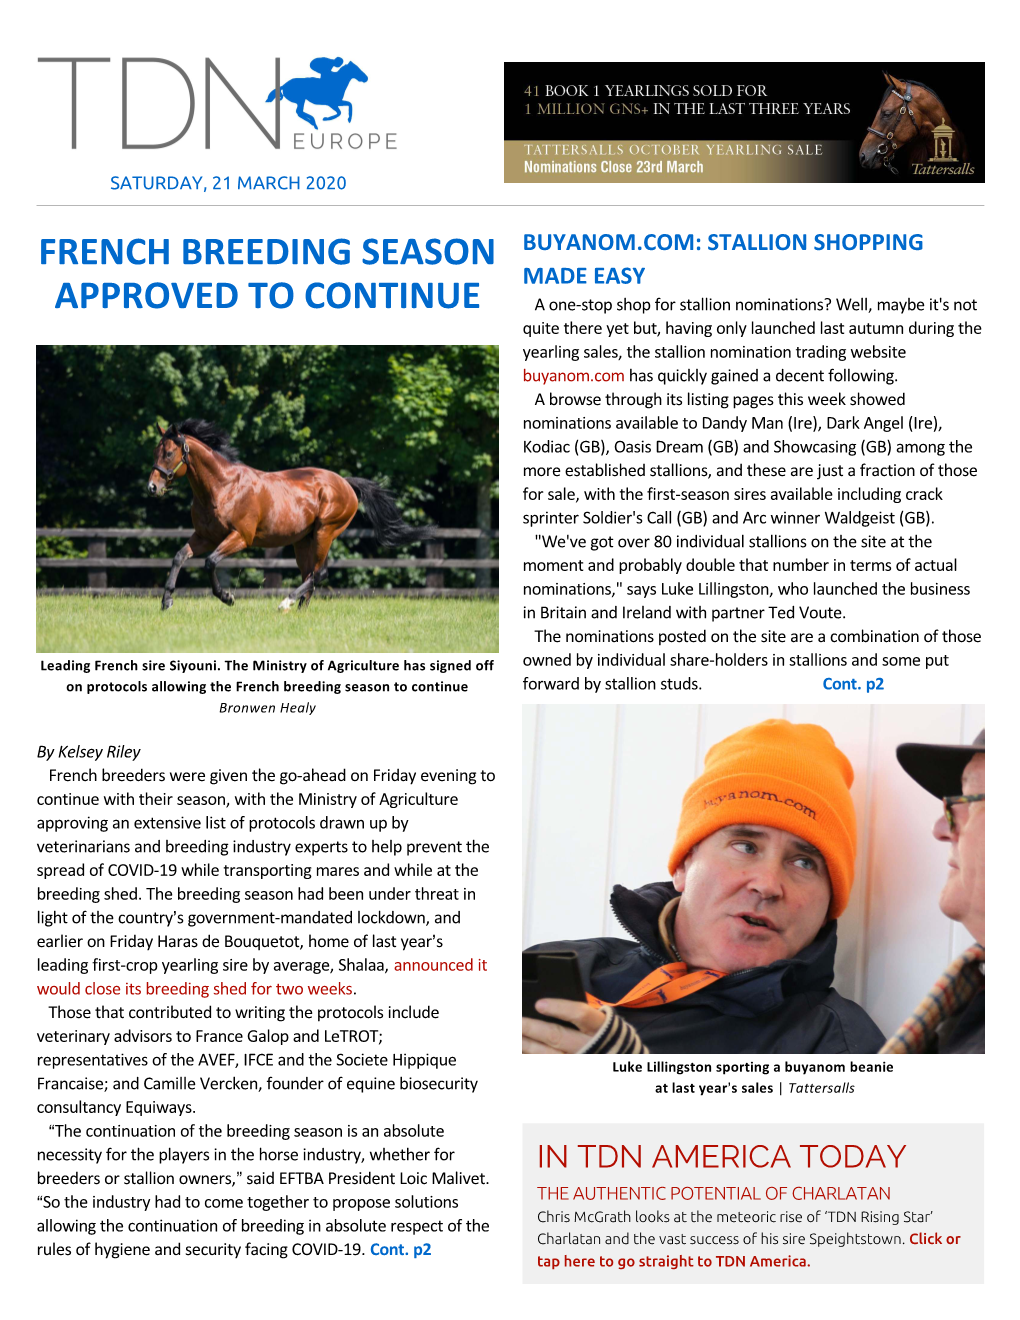 French Breeding Season Approved to Continue Cont